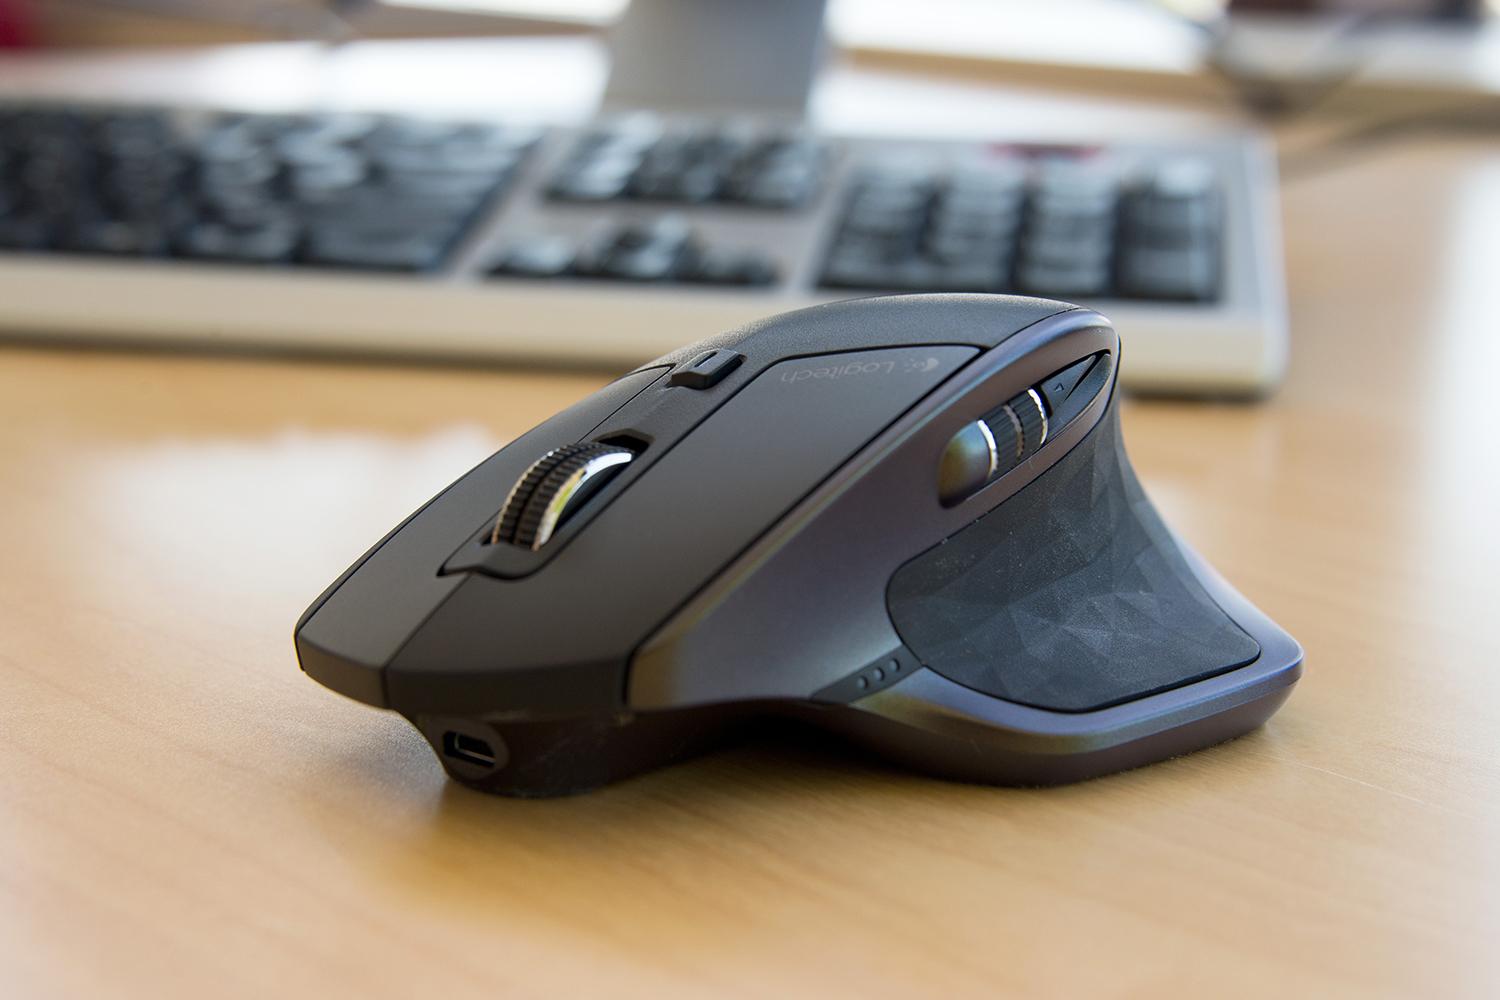 Best wireless mouse deals for July 2022